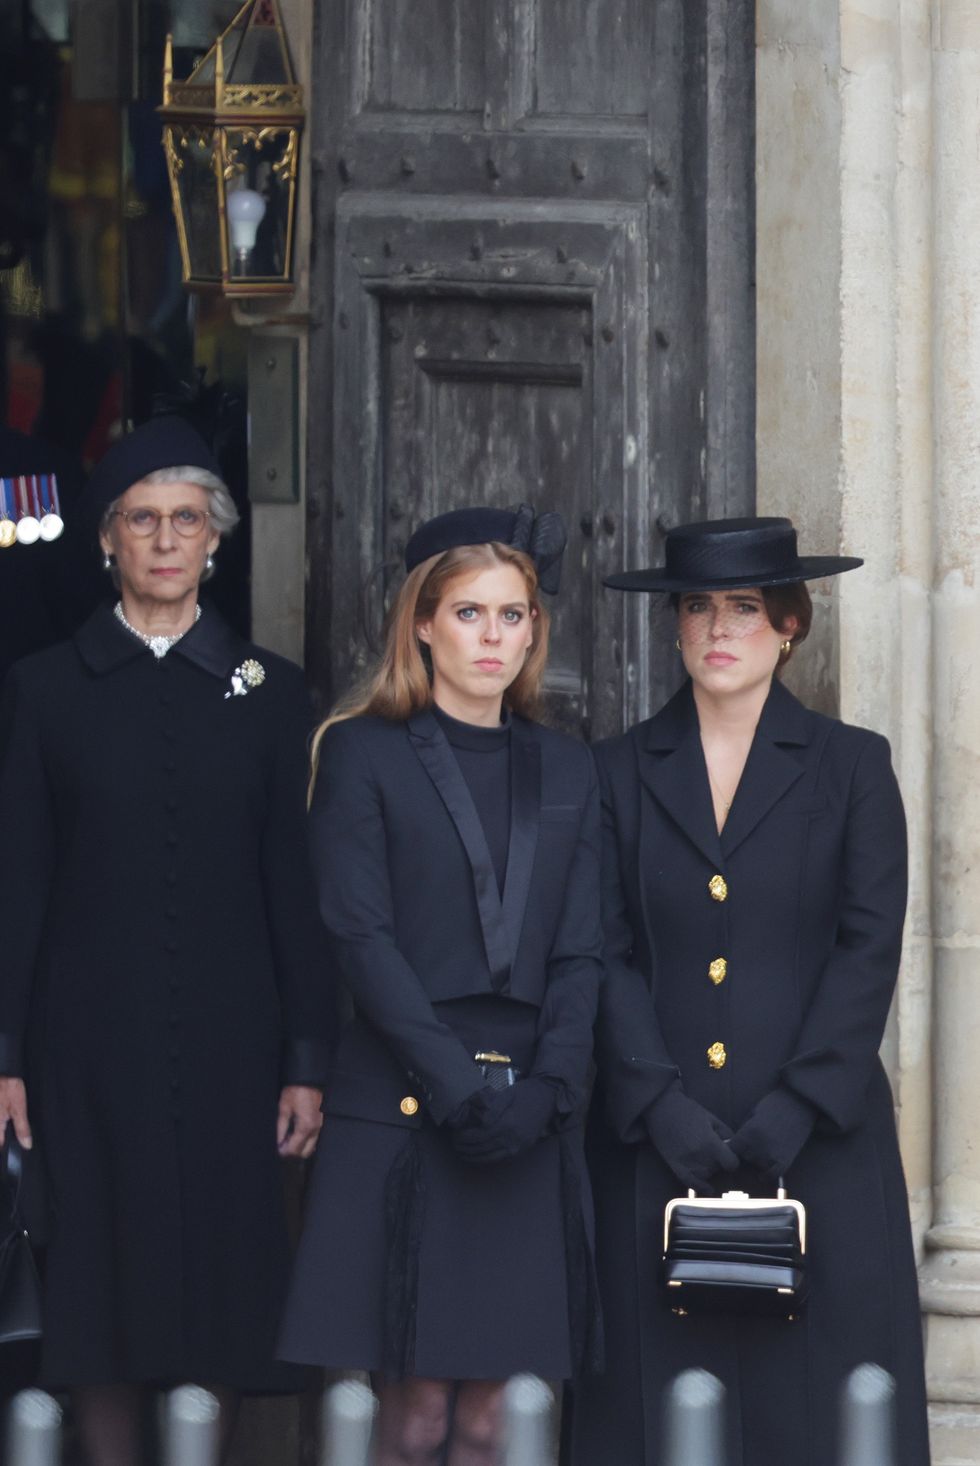 The royal traditions for mourning dress